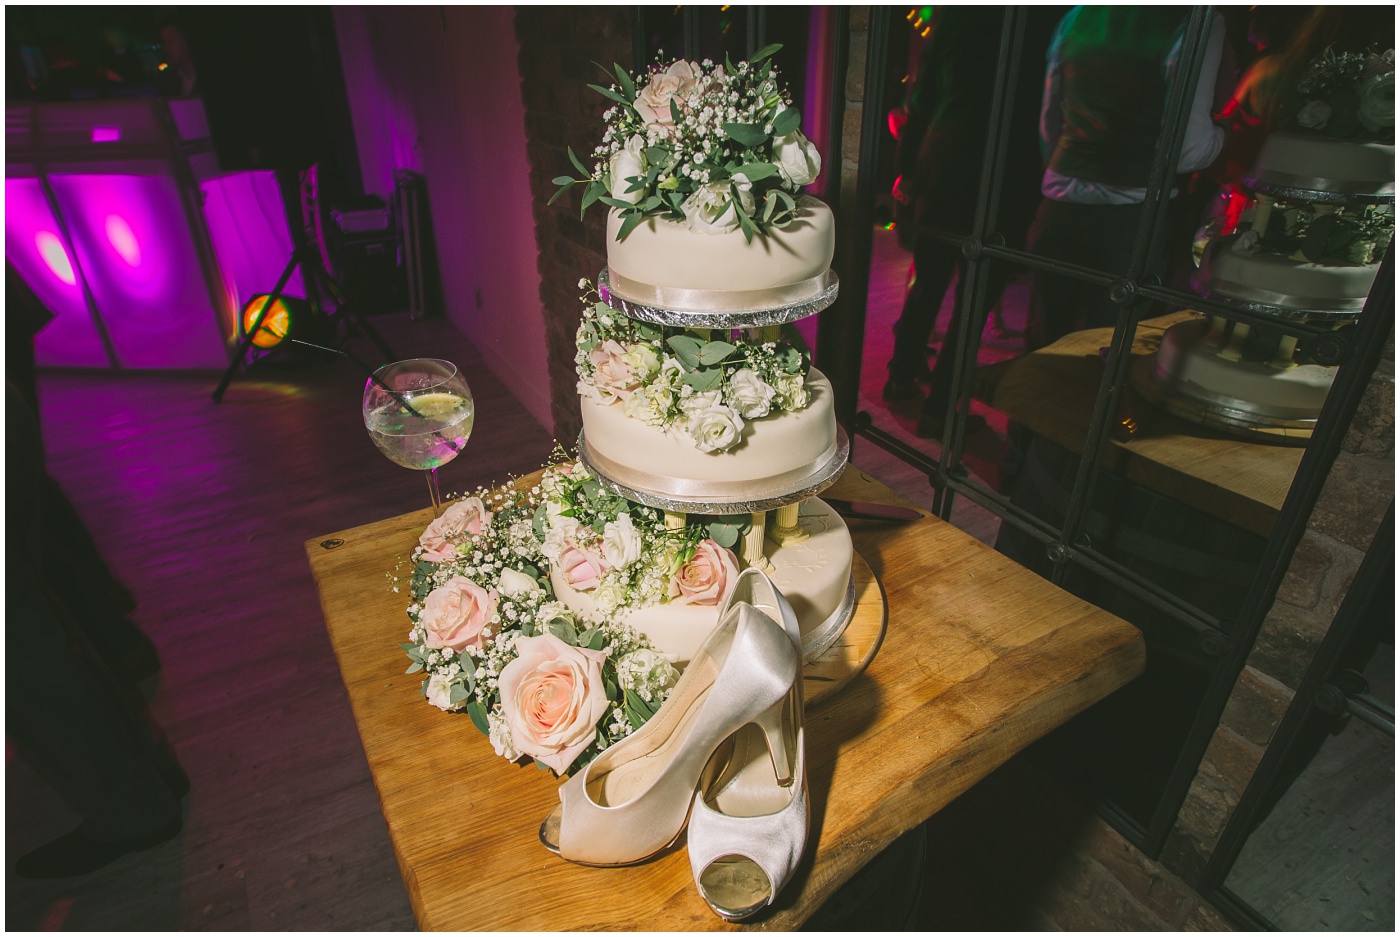 Cake and brides shoes on display at Pryors Hayes